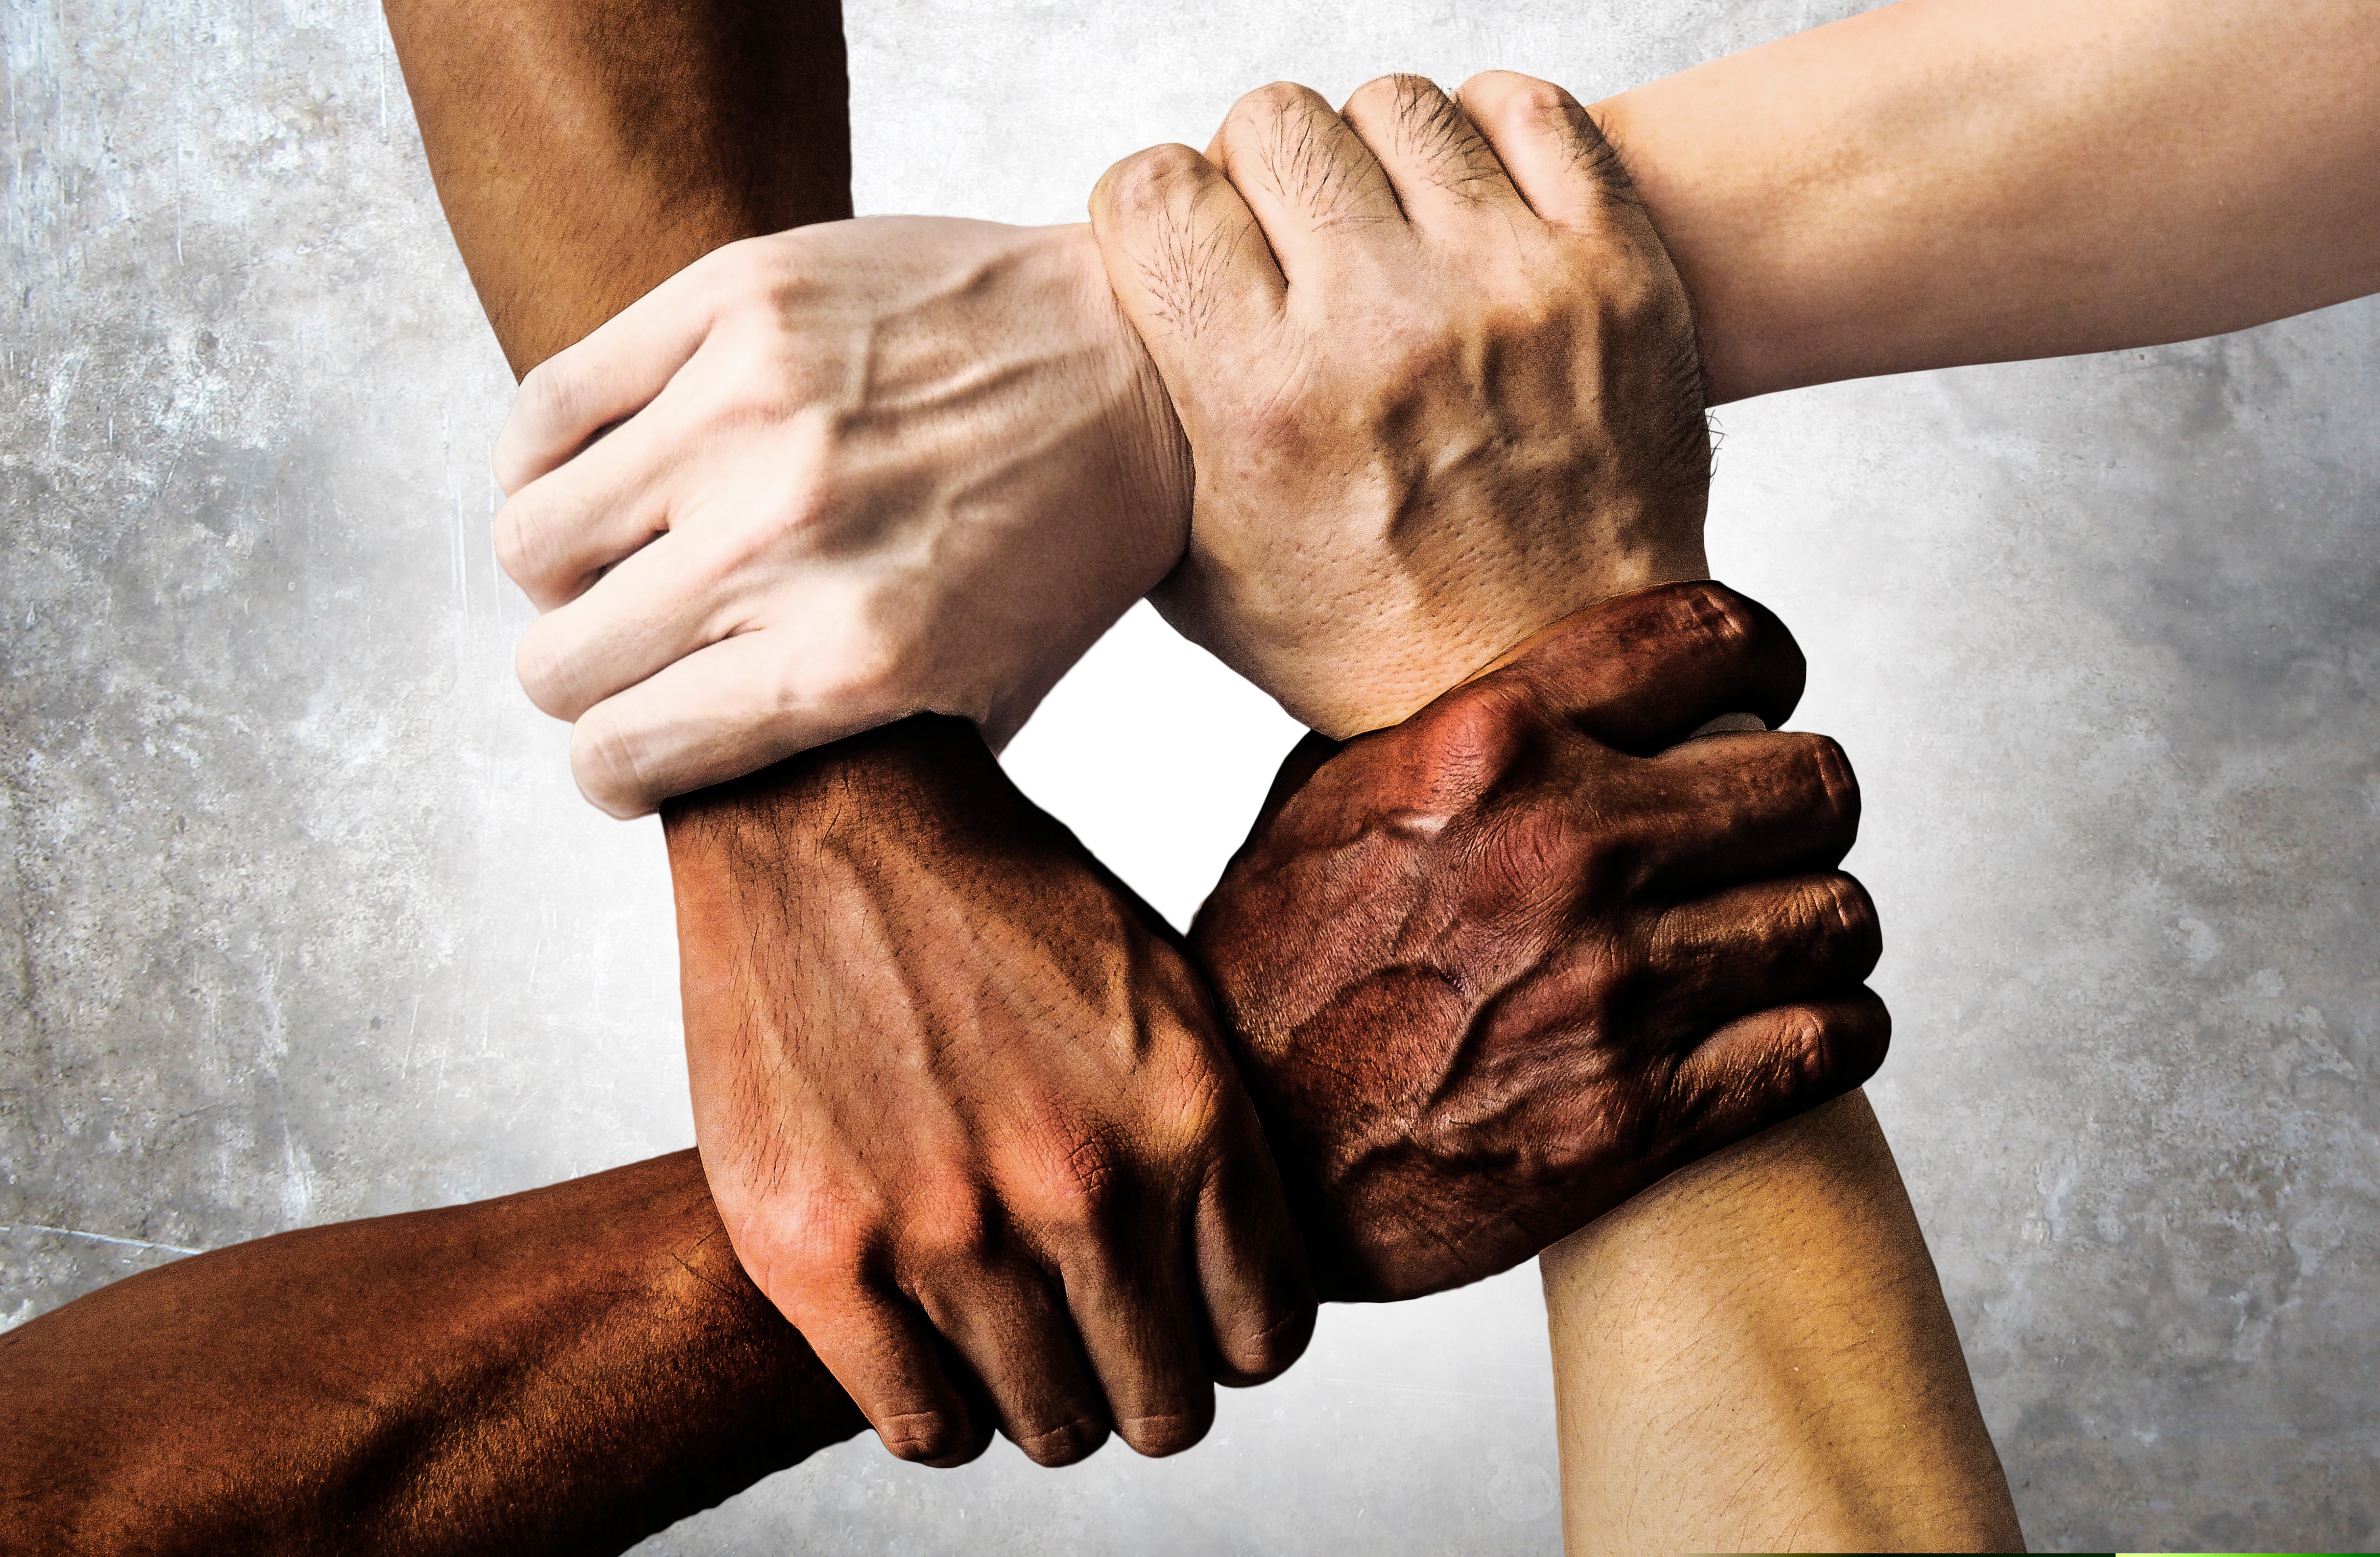 Organisations across sectors call for stronger action against racism and discrimination to achieve health equity